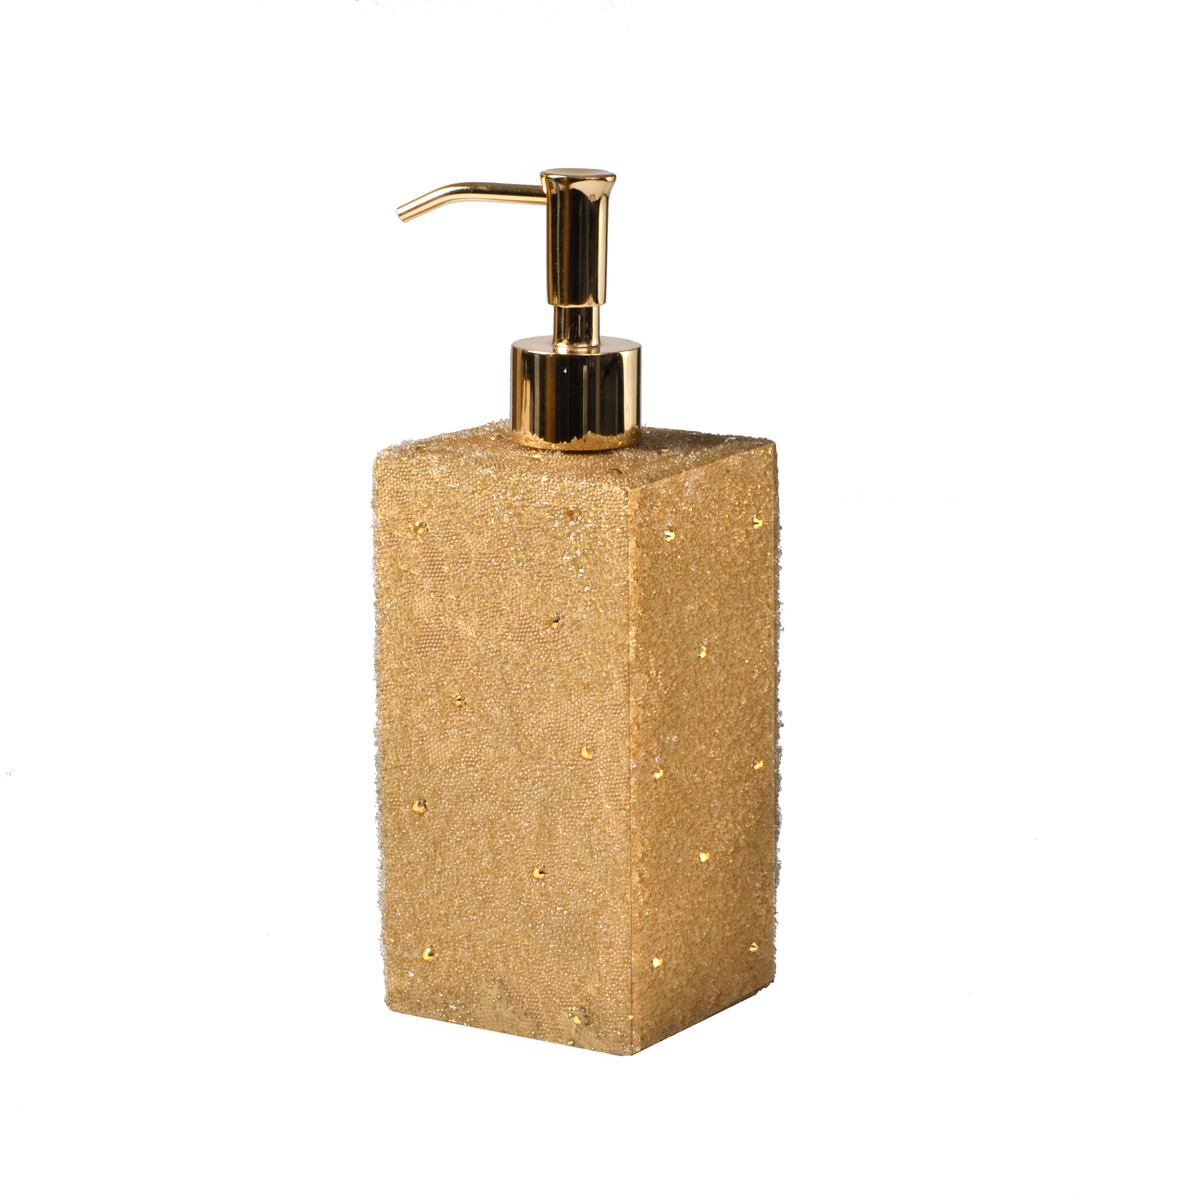 Lotion Pump of Mike and Ally Valletta Bath Accessories in Gold Color